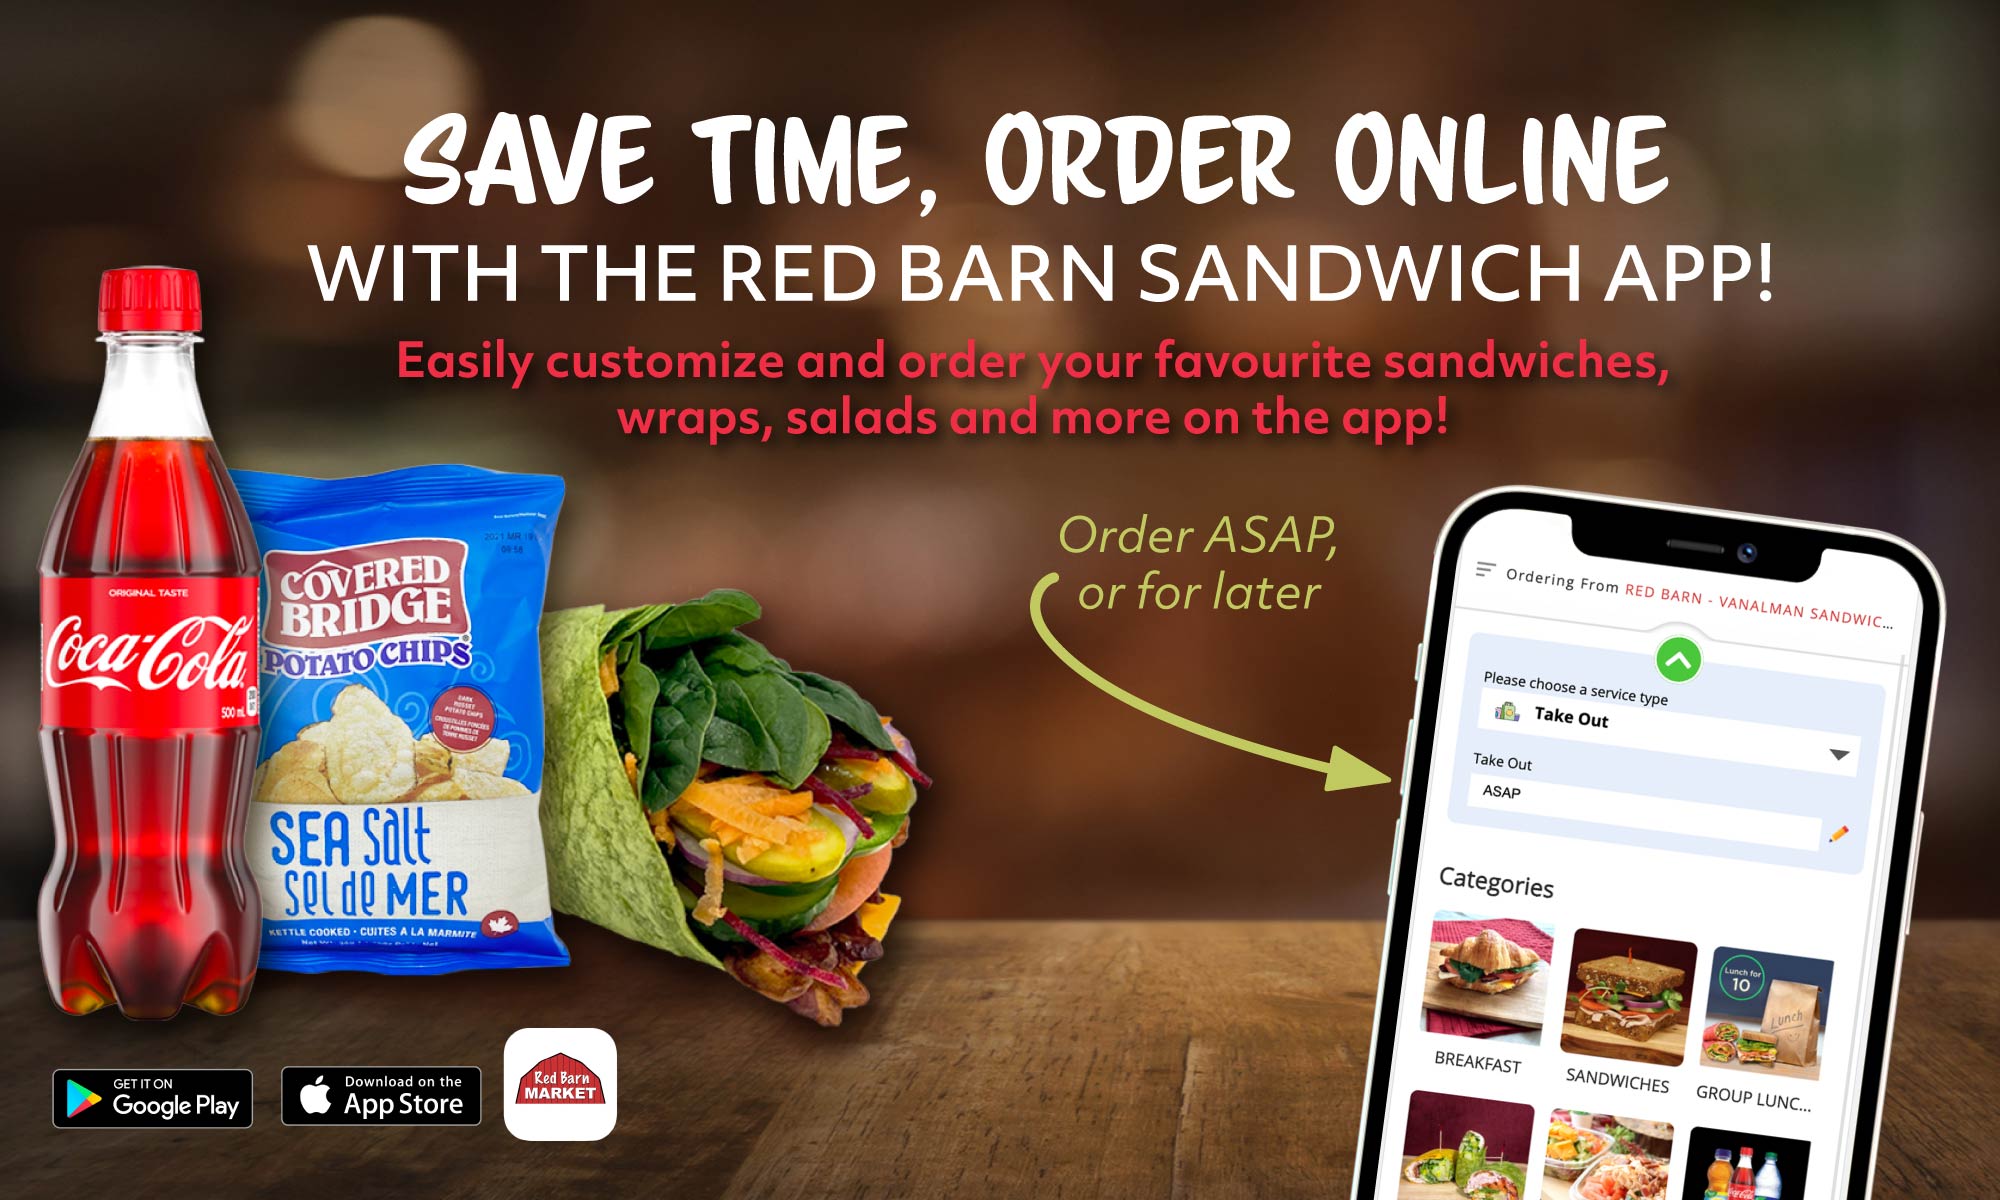 Get the Red Barn Sandwich App Customize and order your favourite sandwiches, wraps, salads and more with the Red Barn Market Sandwich App!